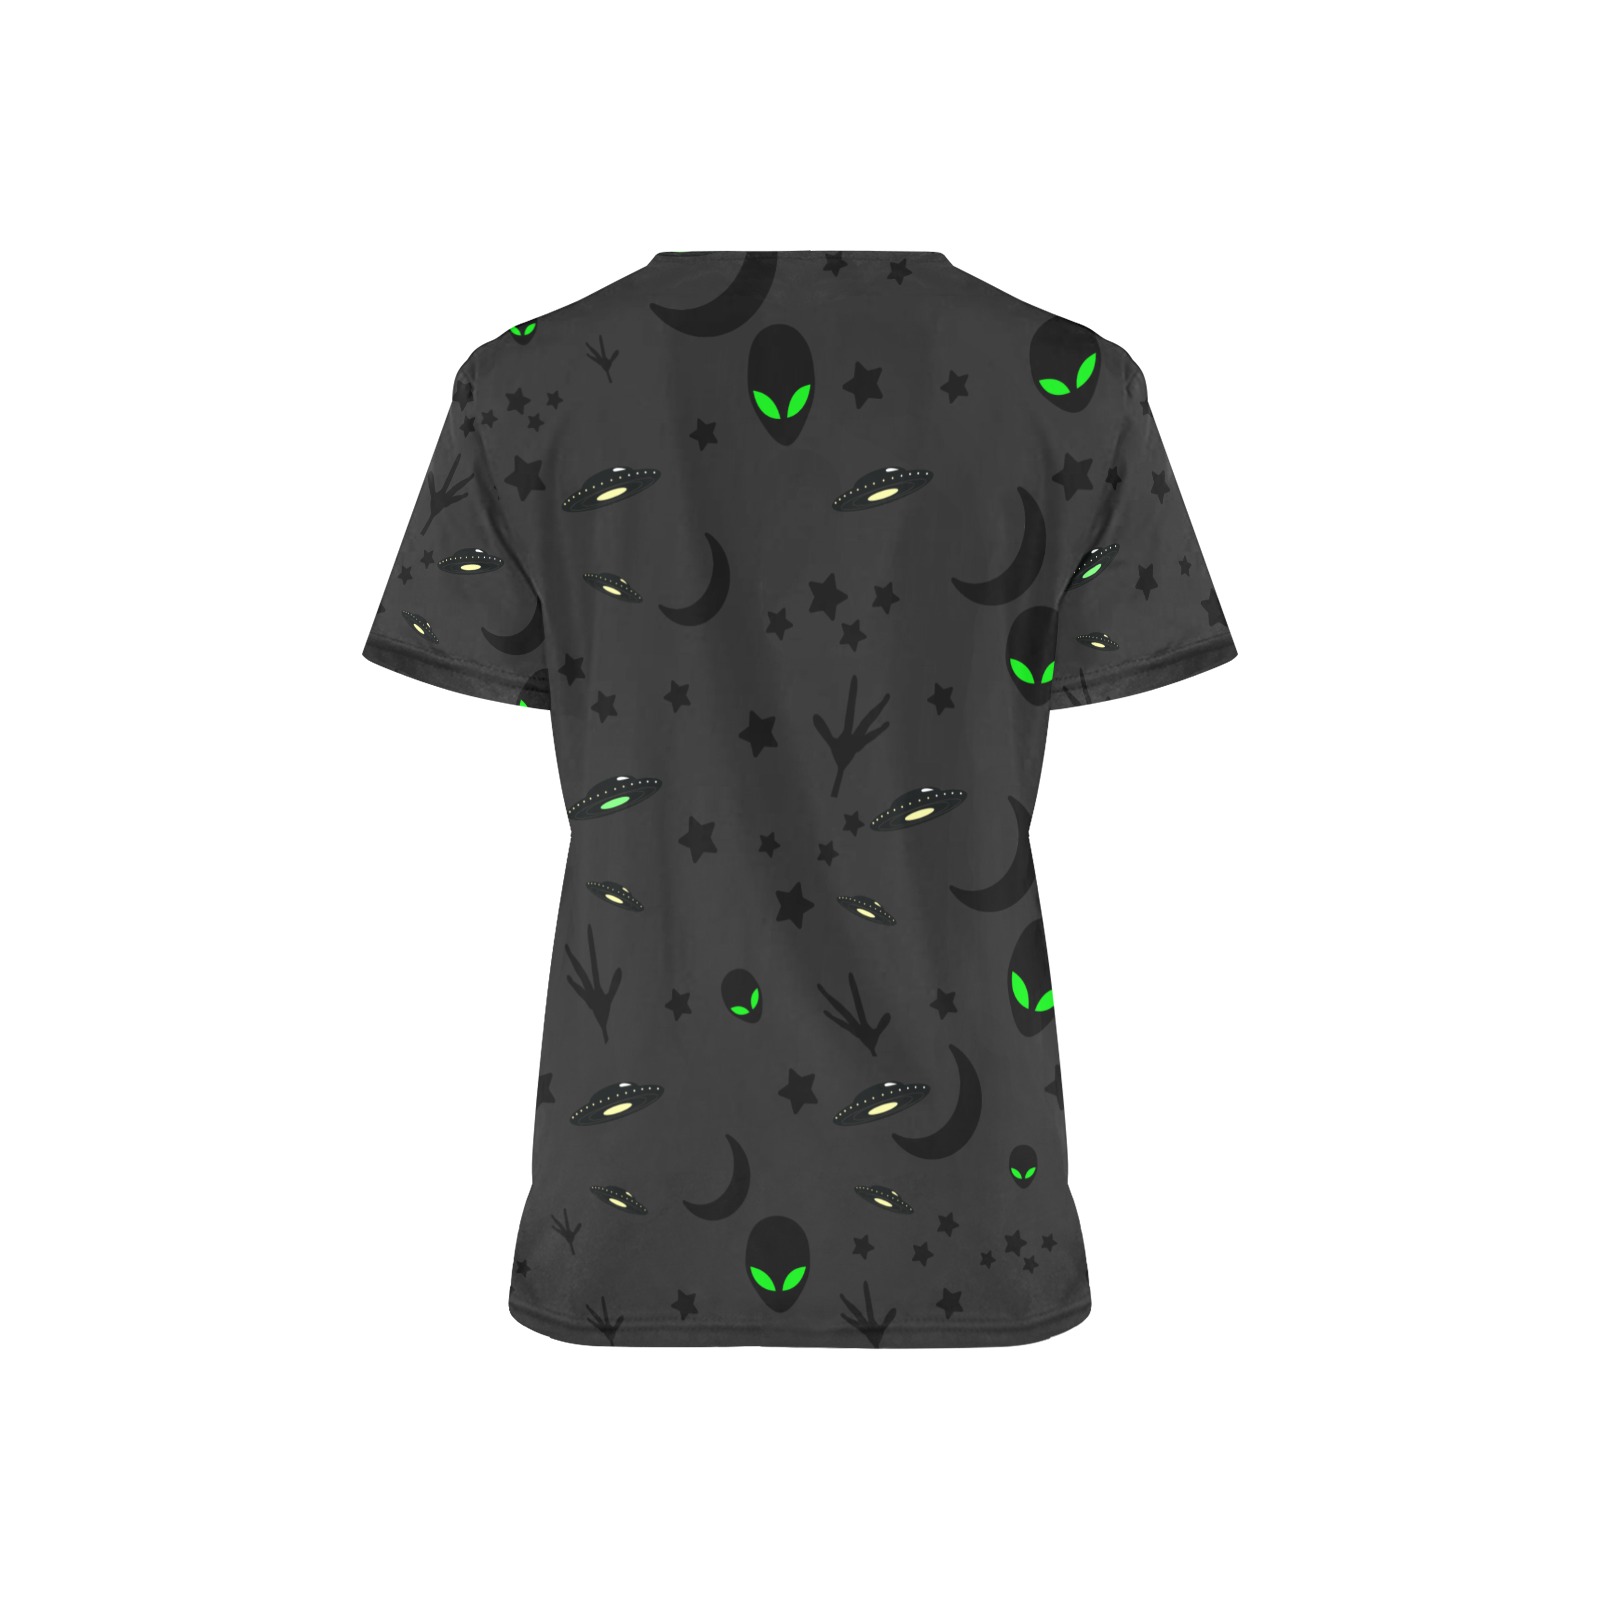 Aliens and Spaceships - Charcoal All Over Print Scrub Top